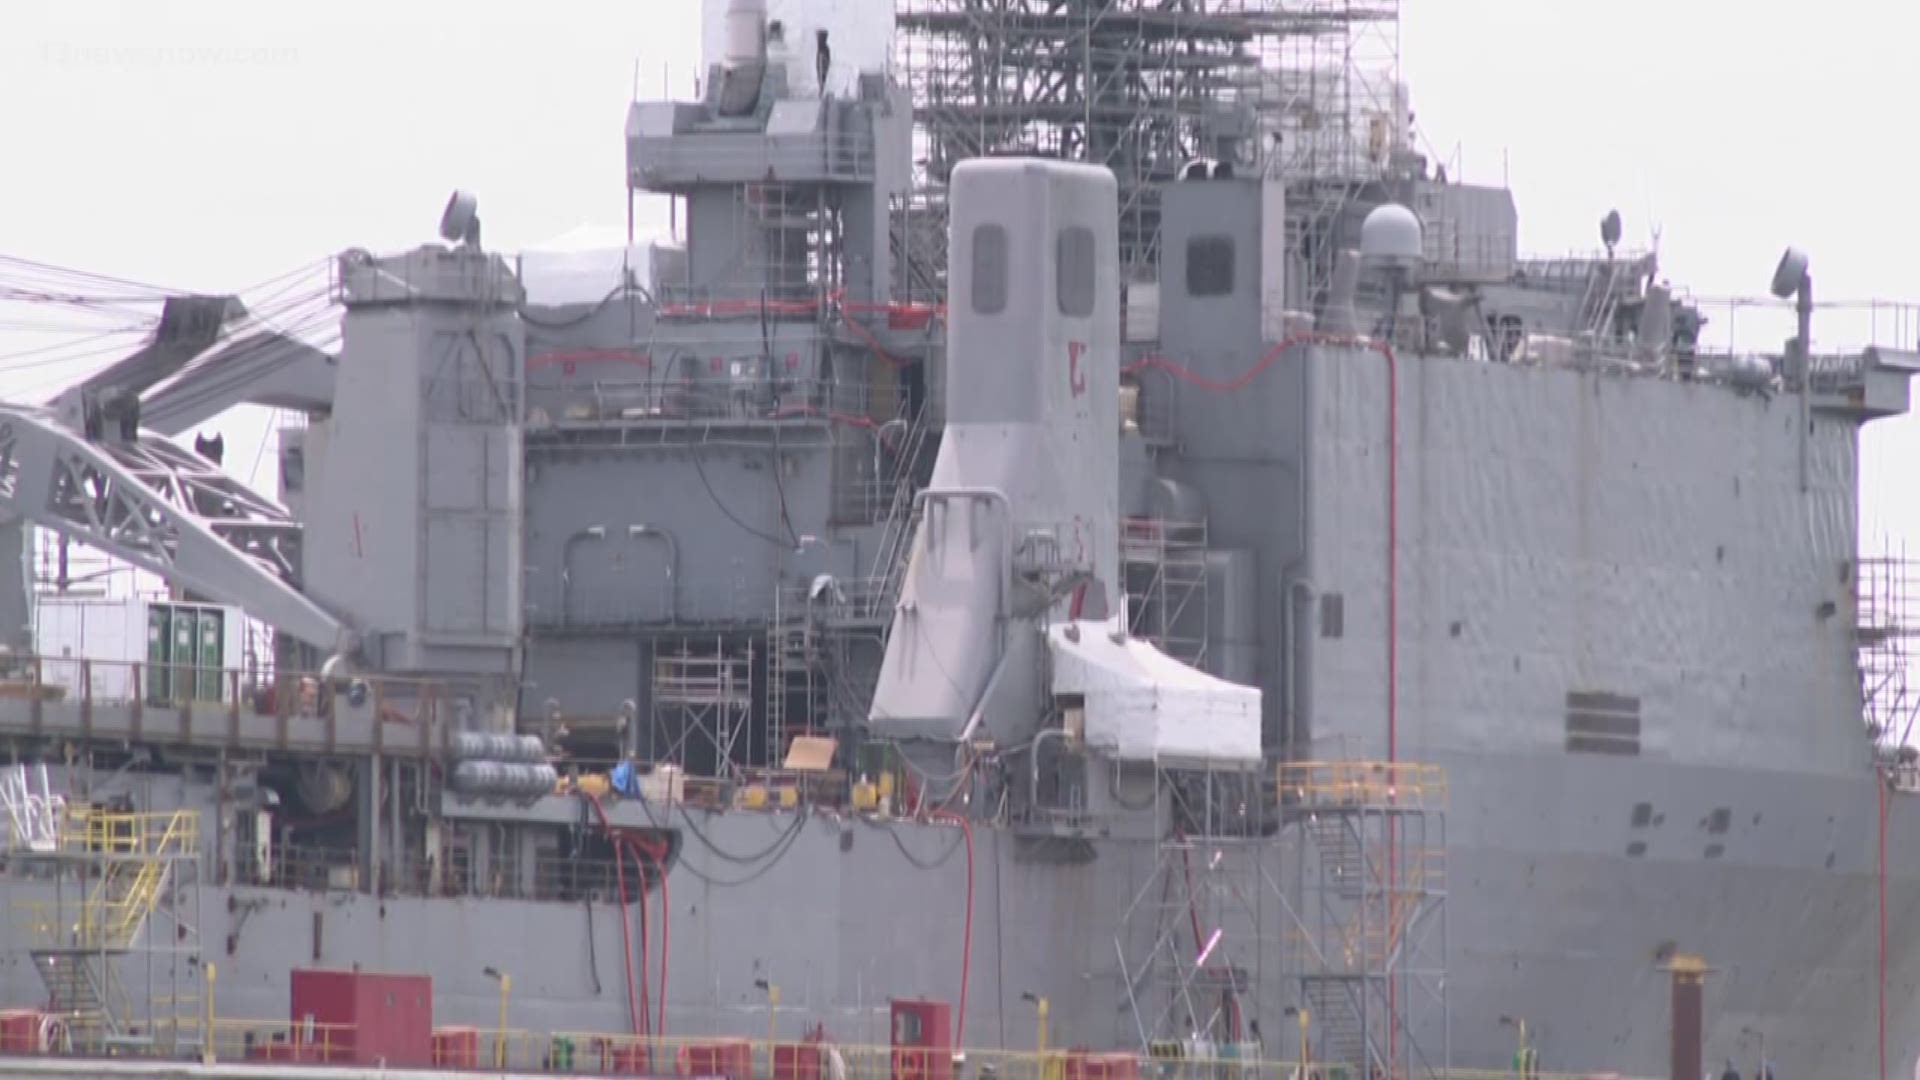 The Navy is investigating a bomb threat aimed at USS Gunston Hall.